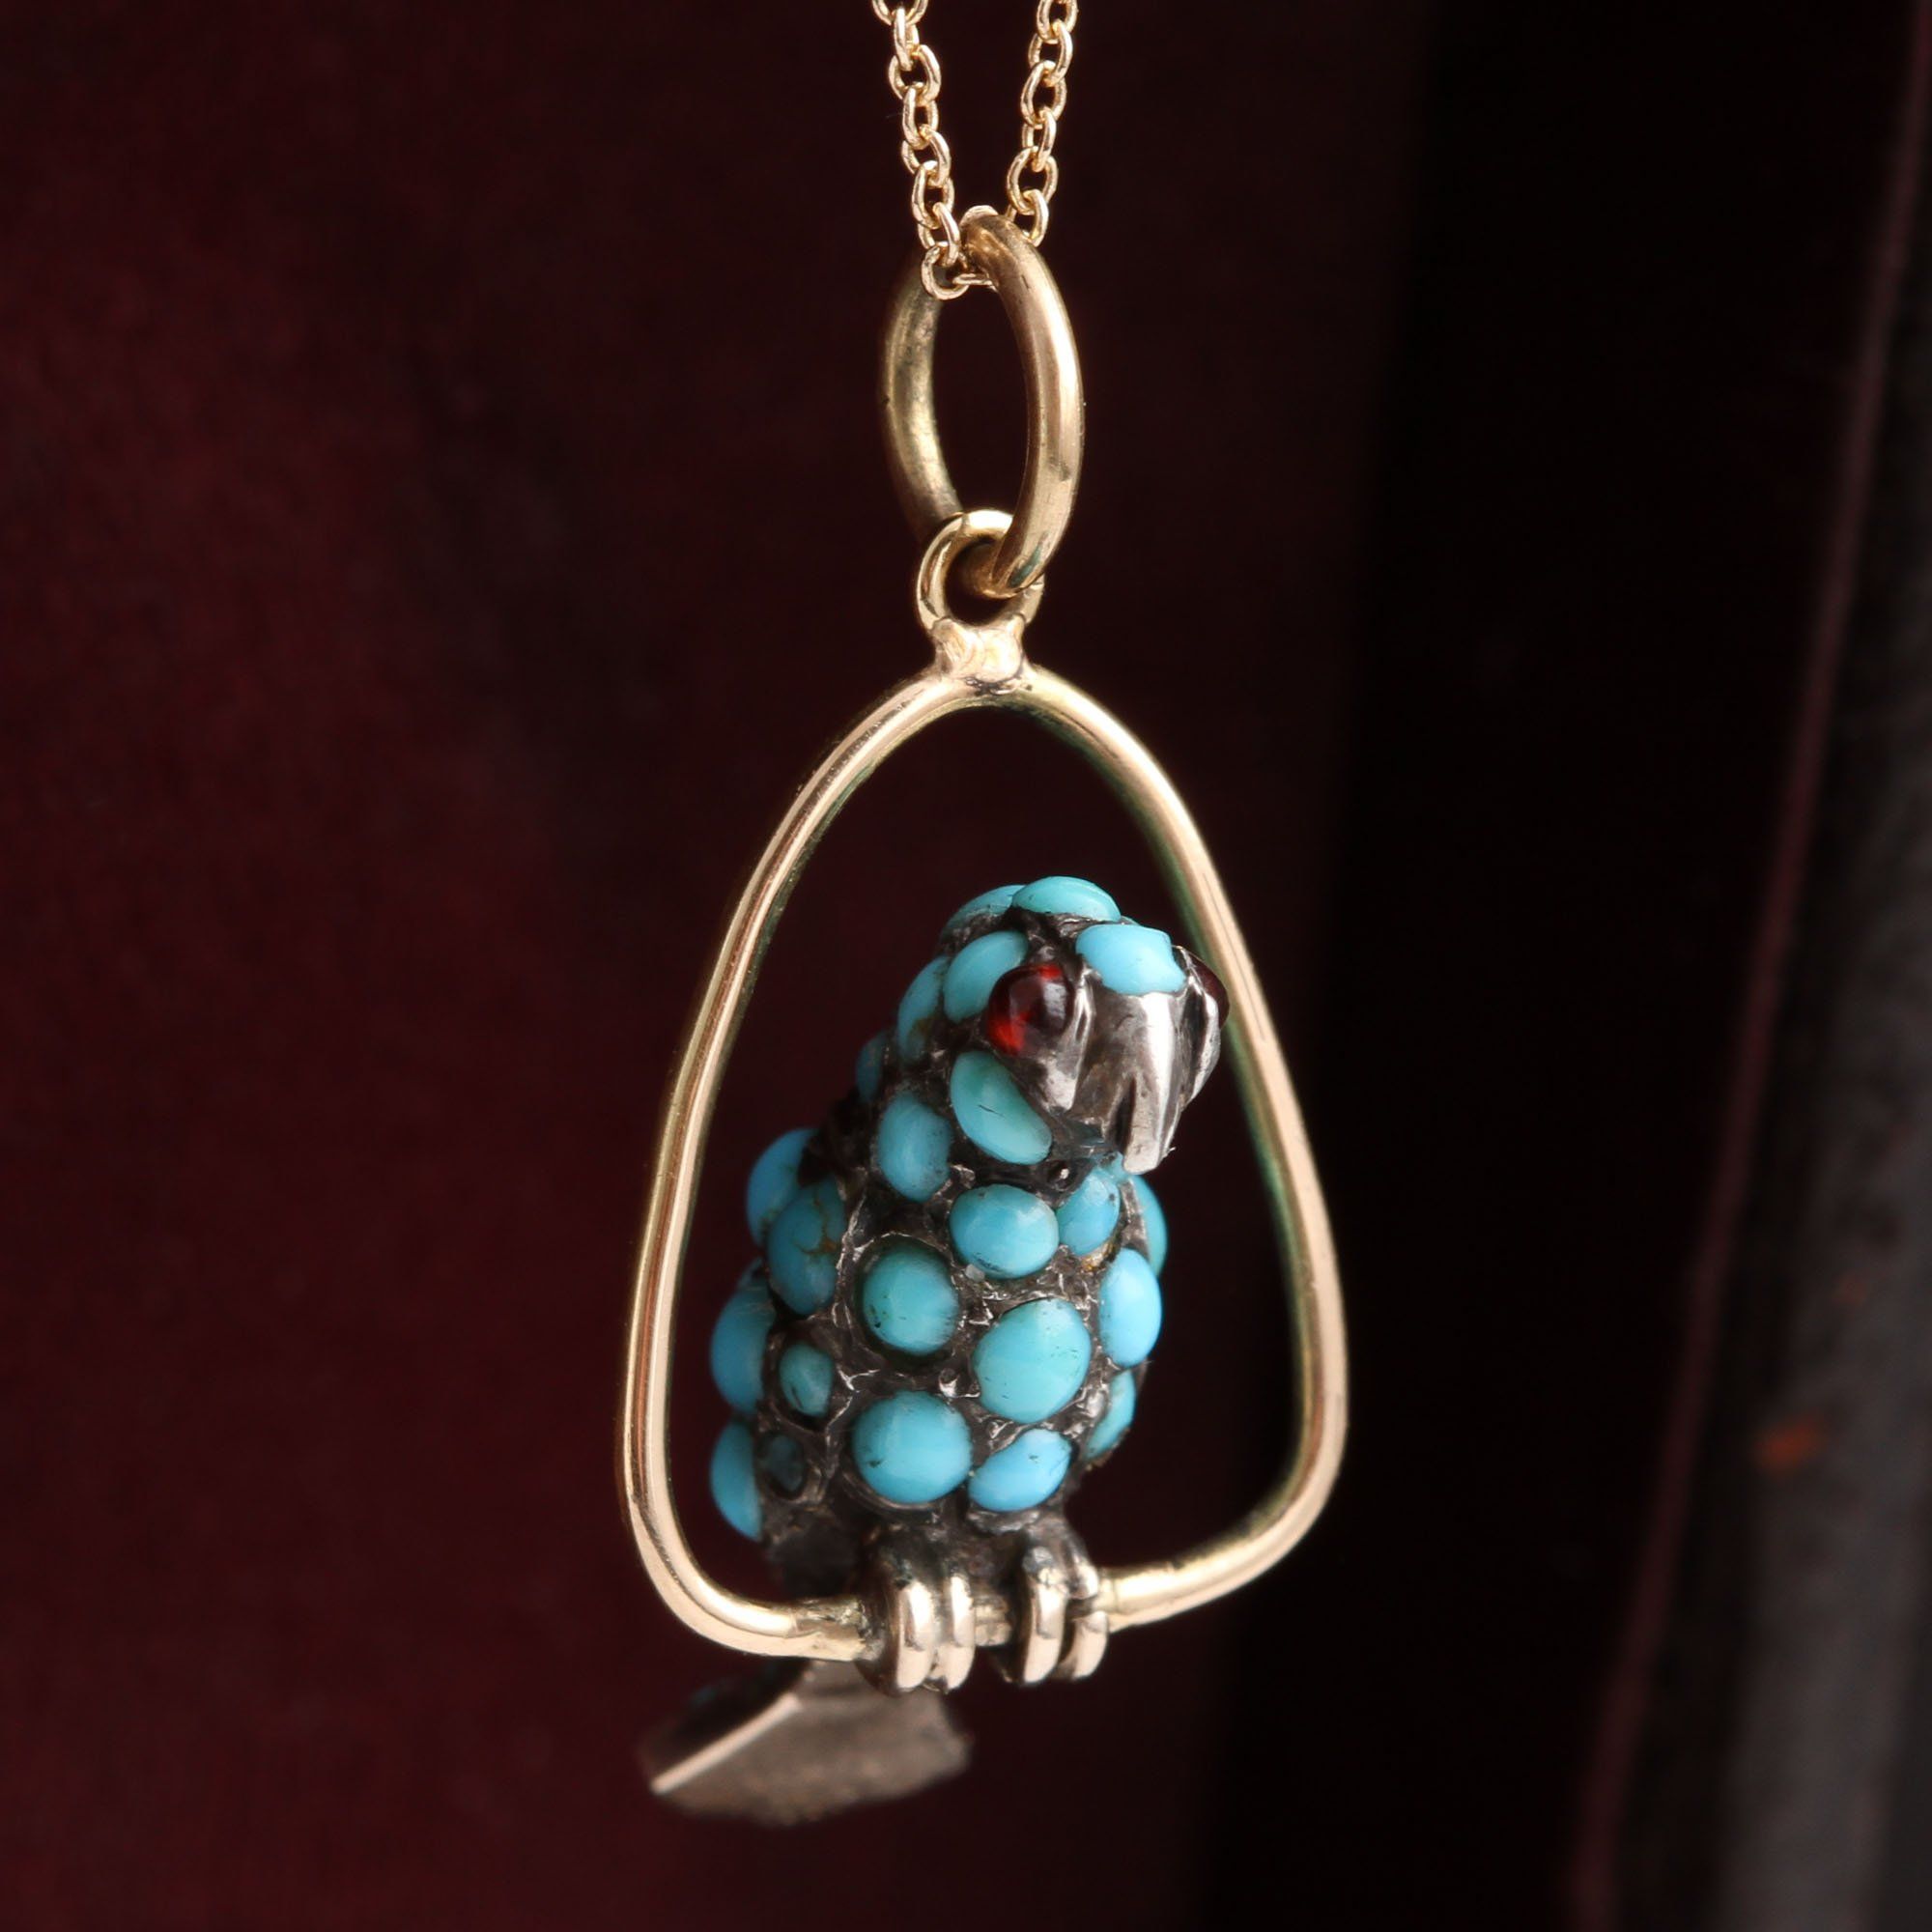 Detail of Victorian Turquoise and Garnet Parrot Charm Necklace